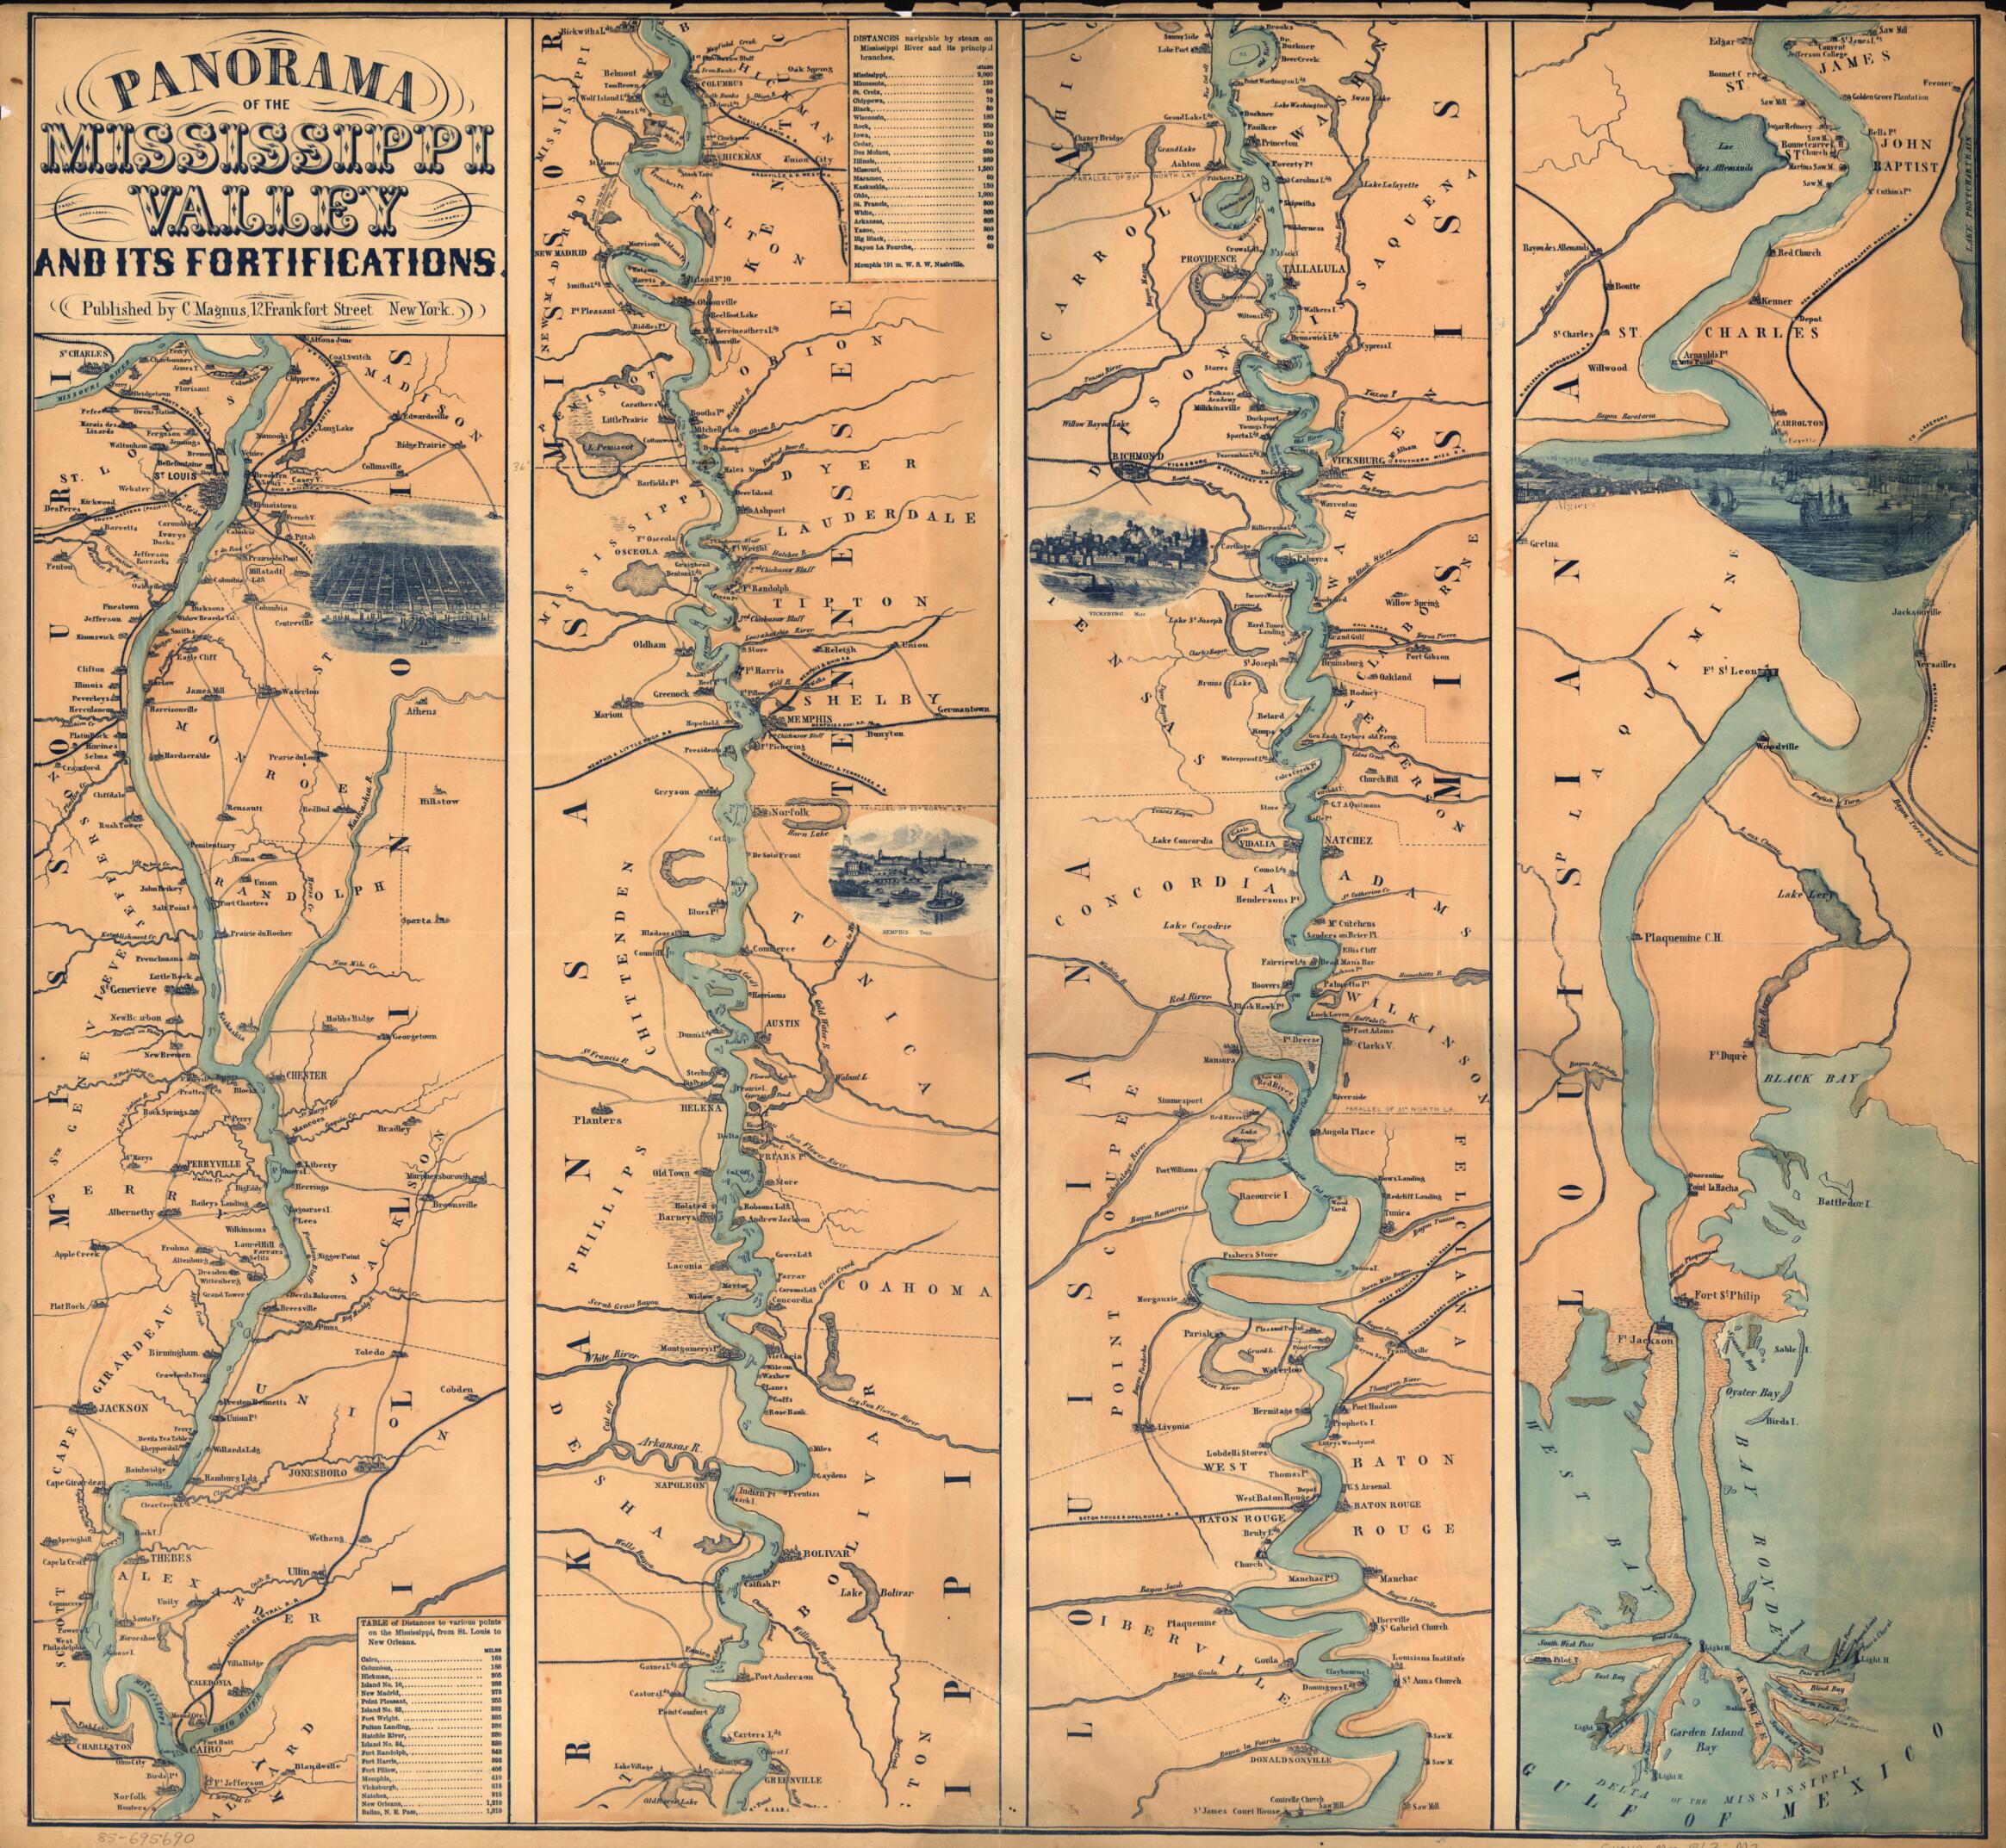 This old map of Panorama of the Mississippi Valley : and Its Fortifications from 1863 was created by F. W. Boell, Charles Magnus in 1863